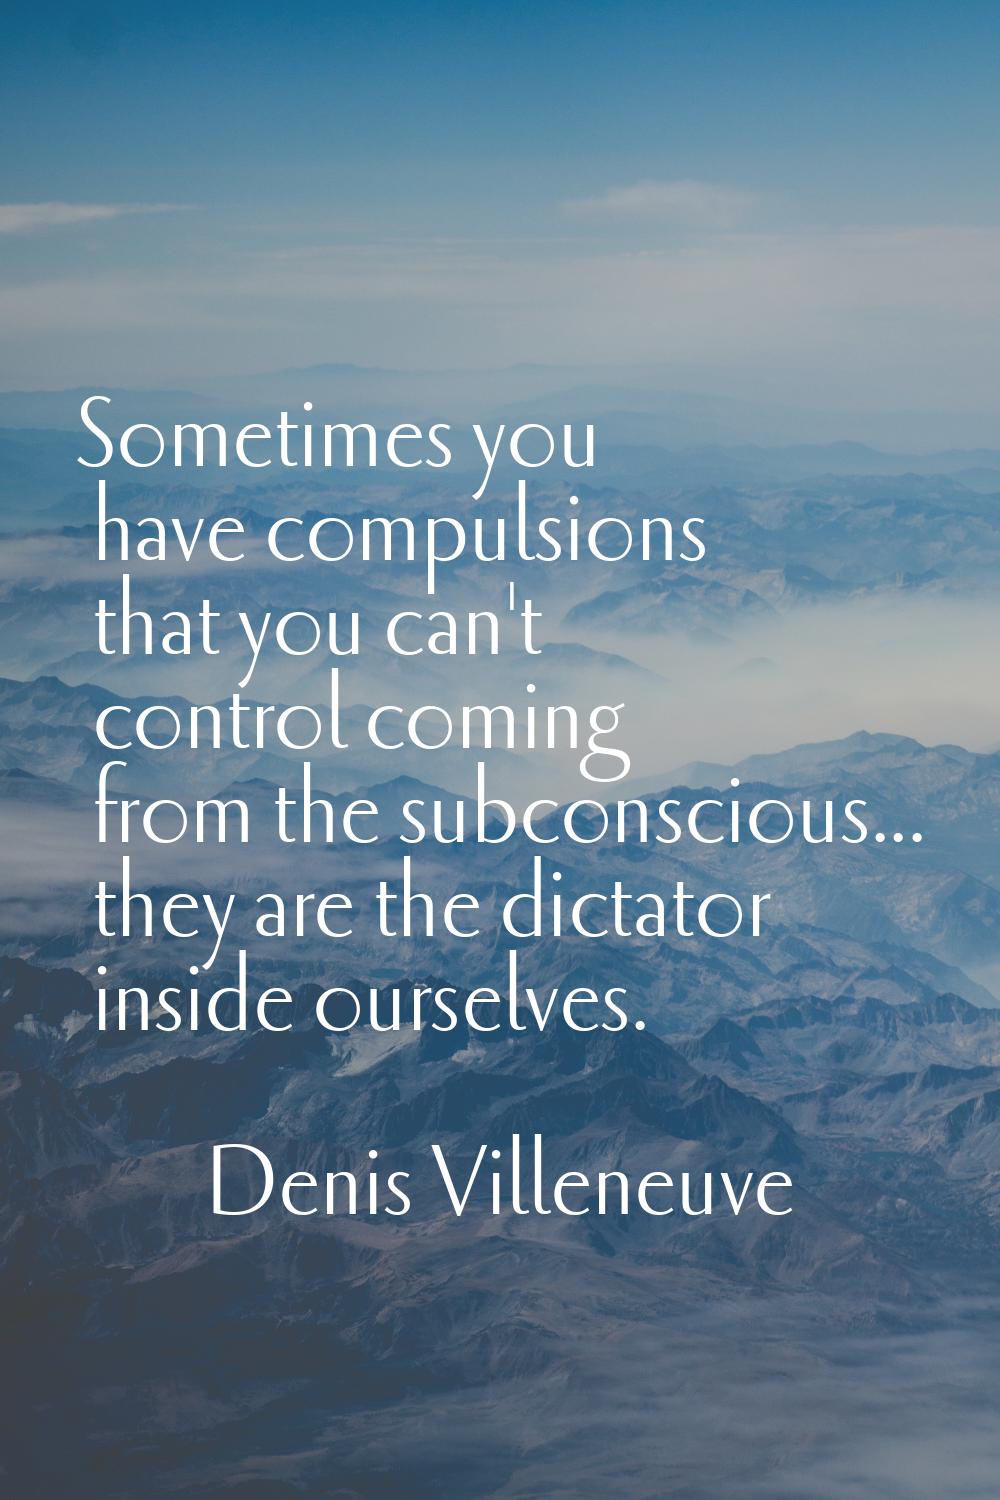 Sometimes you have compulsions that you can't control coming from the subconscious... they are the 